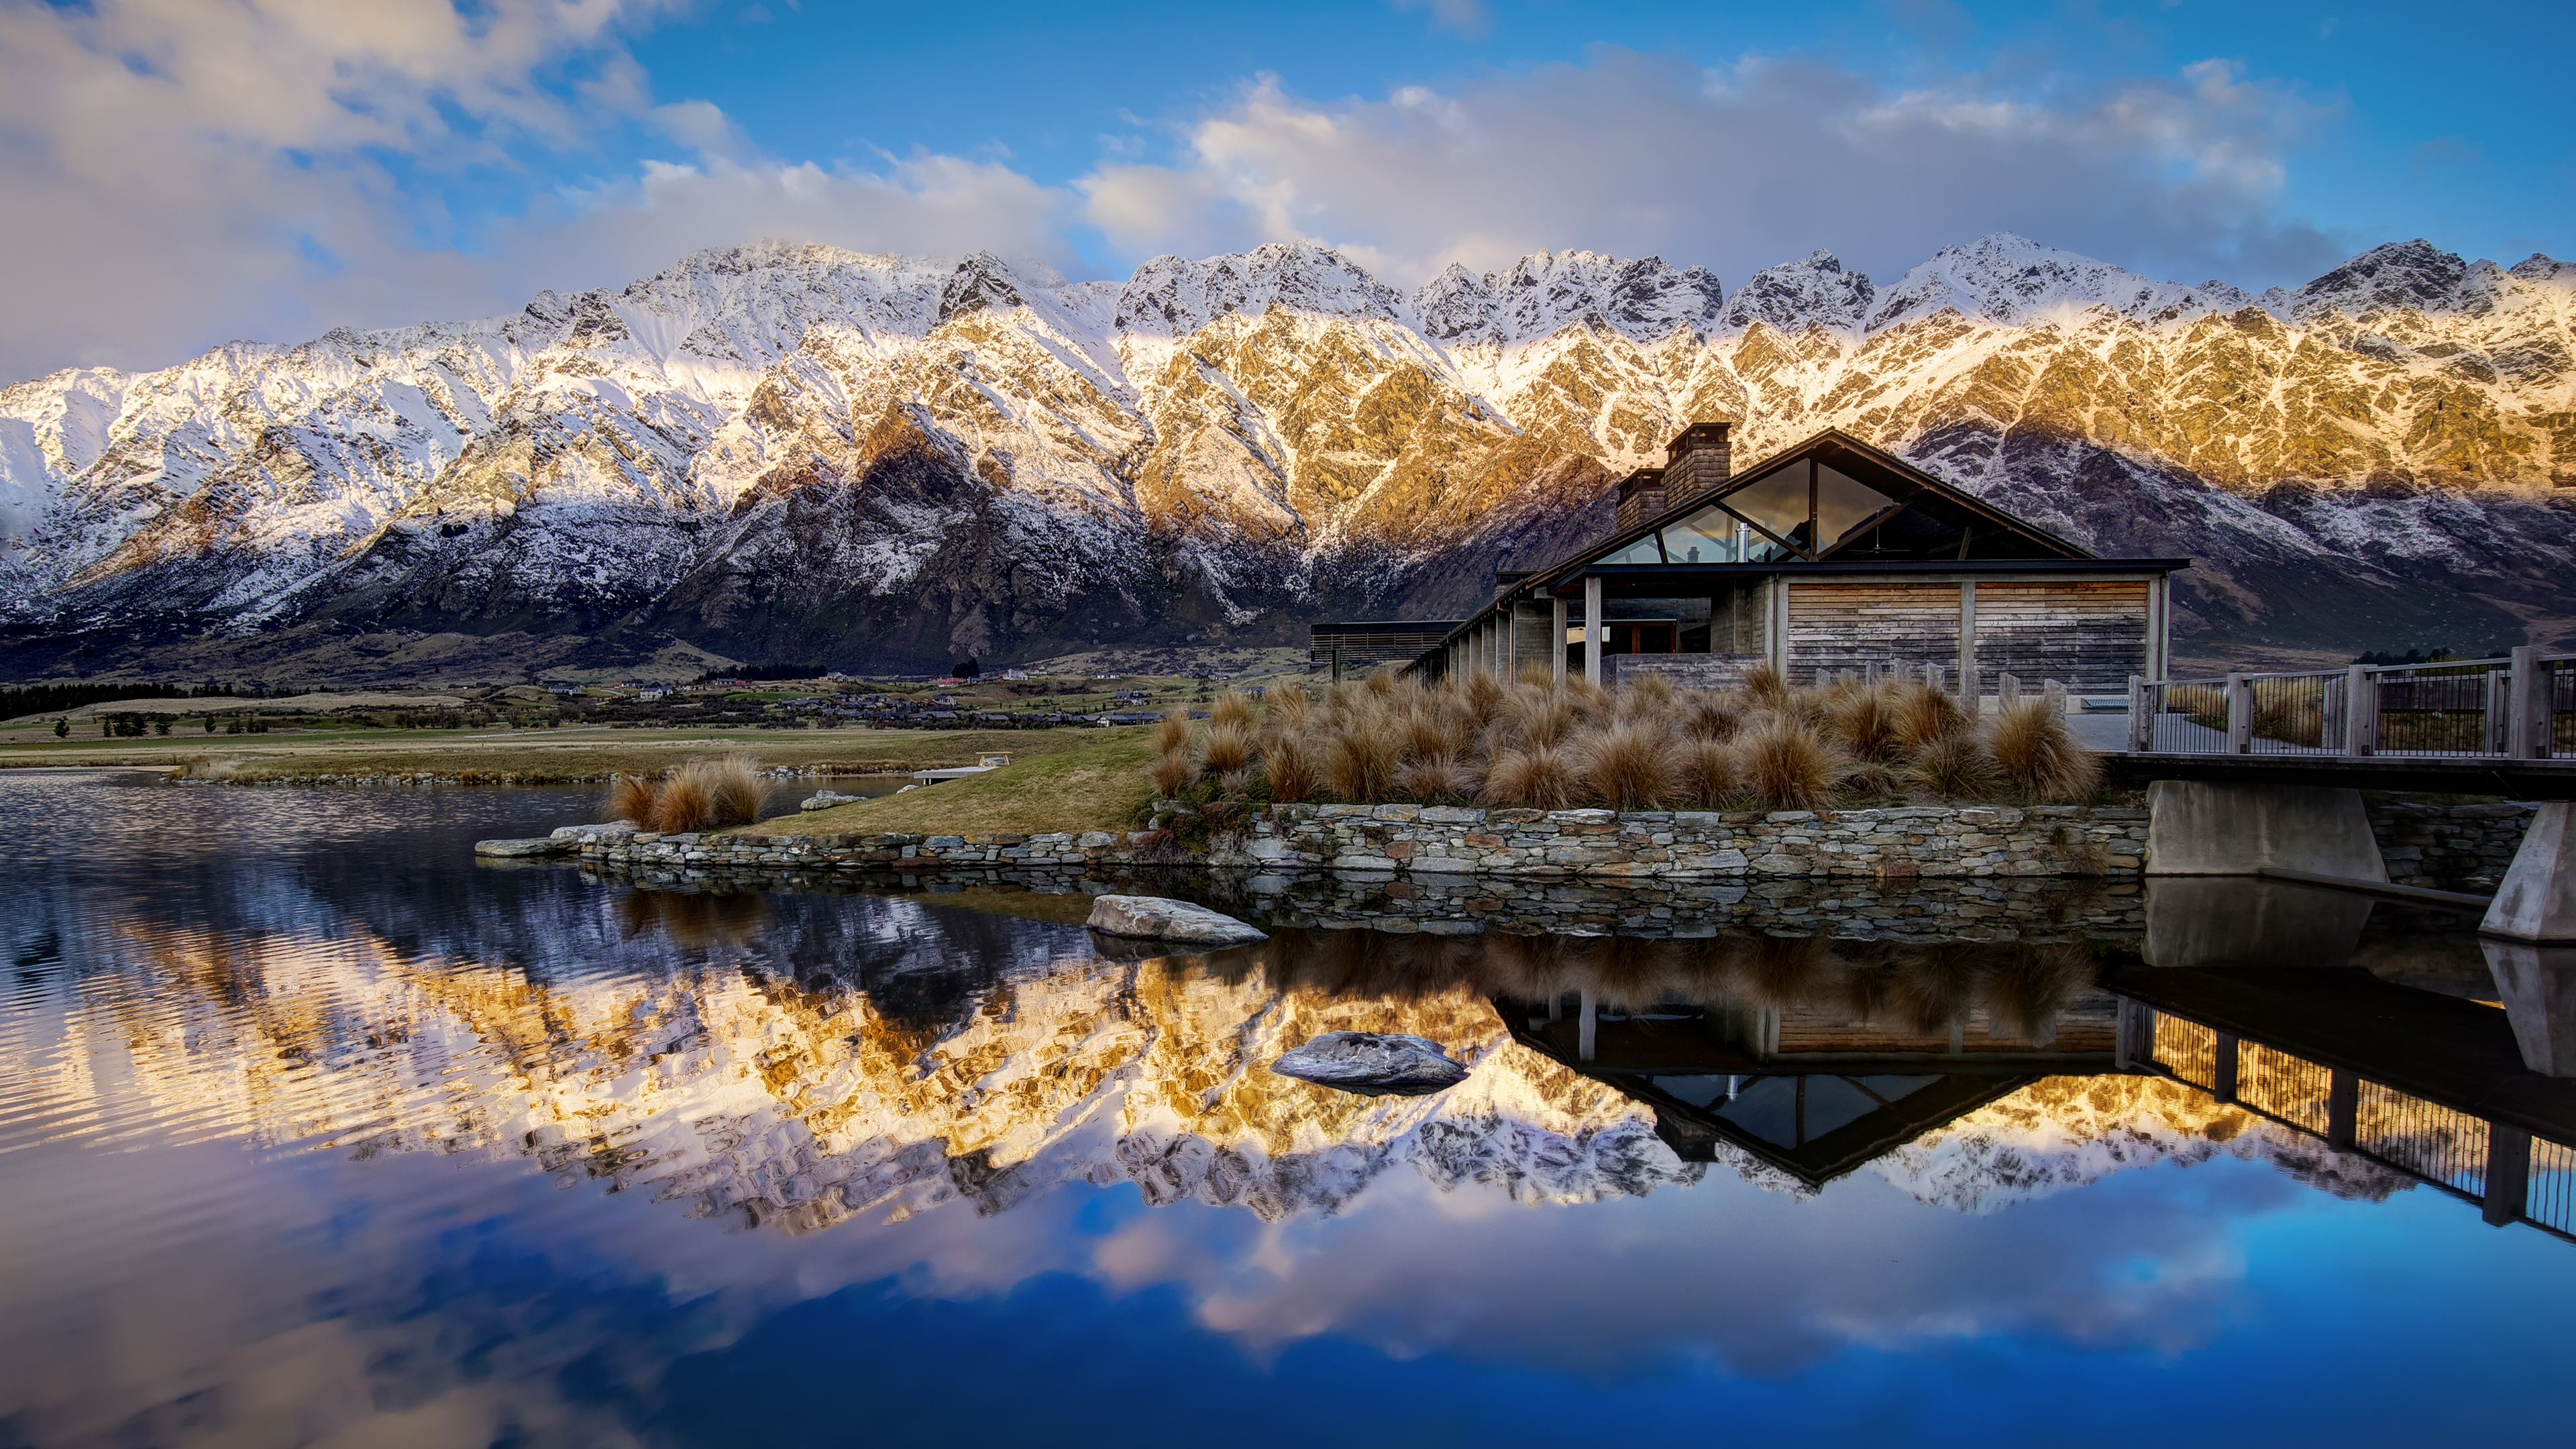 General 3840x2160 landscape 4K Queenstown New Zealand nature mountains water reflection house snow